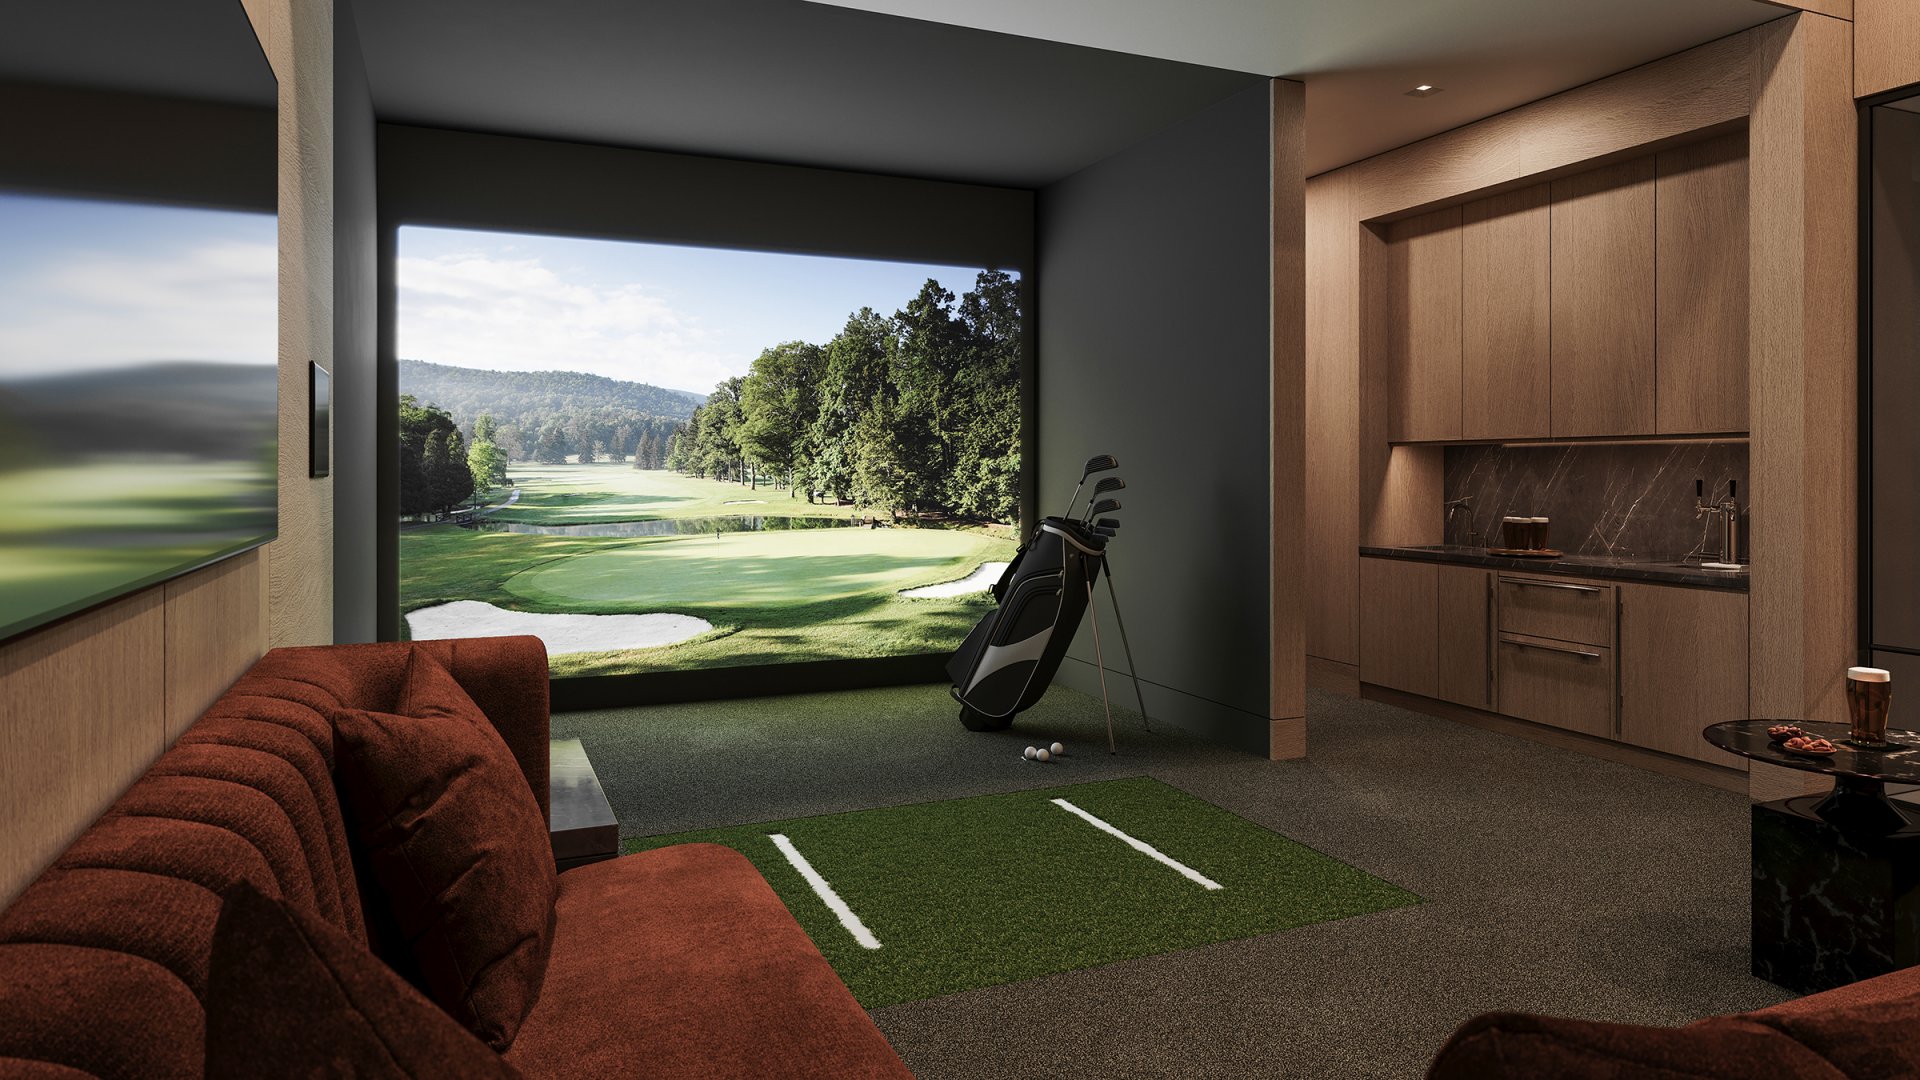 The Cortland Gold Simulator and Club Room